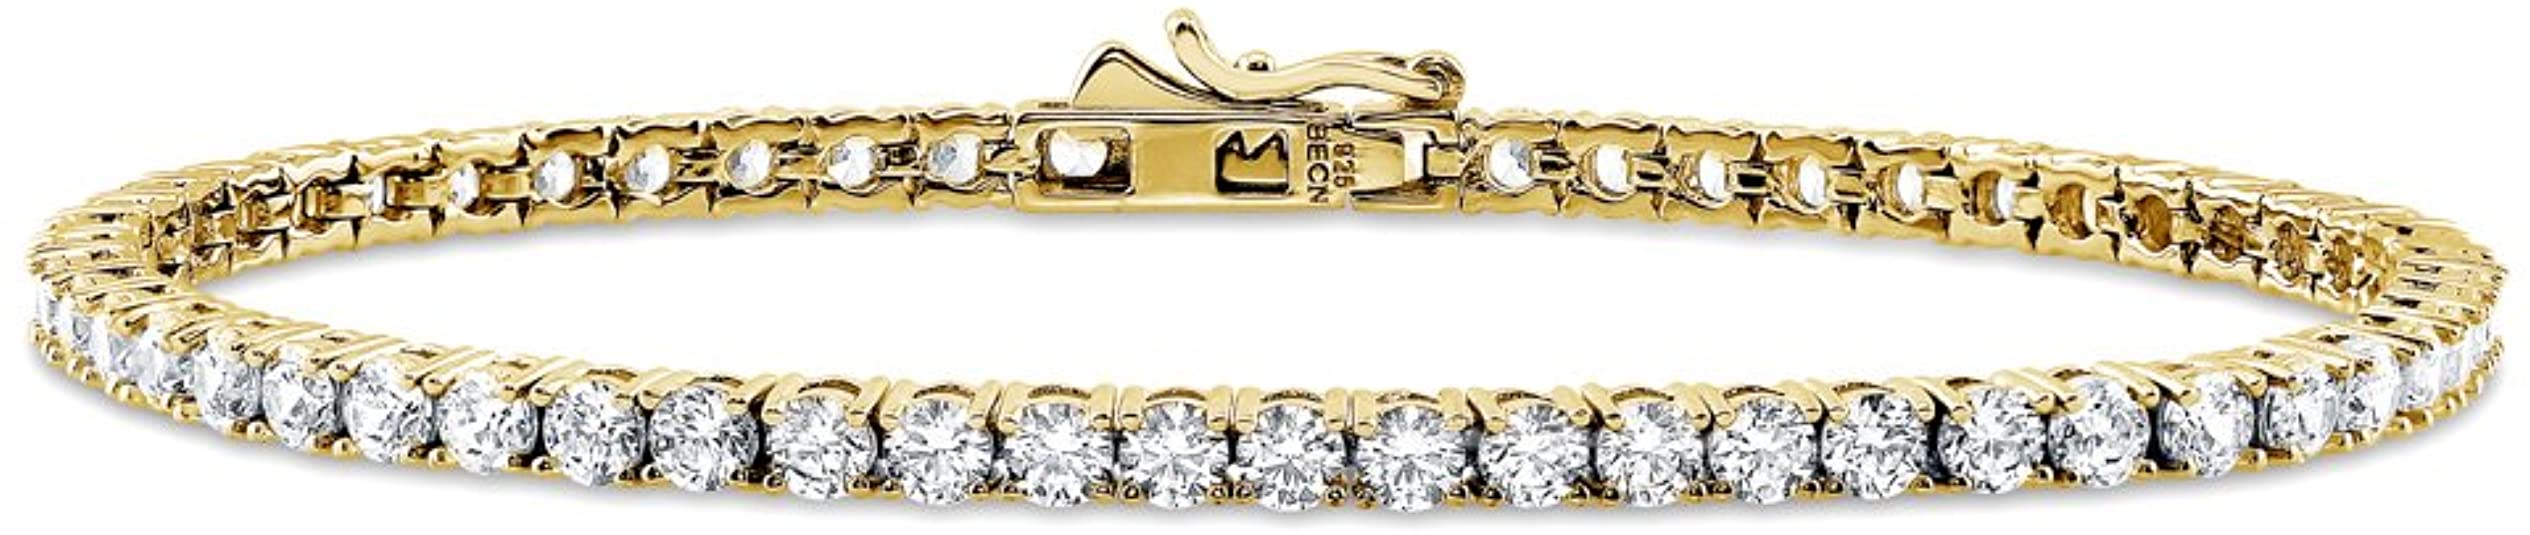 BERRICLE Yellow Gold Flashed Sterling Silver Wedding Tennis Bracelet Made with Swarovski Zirconia